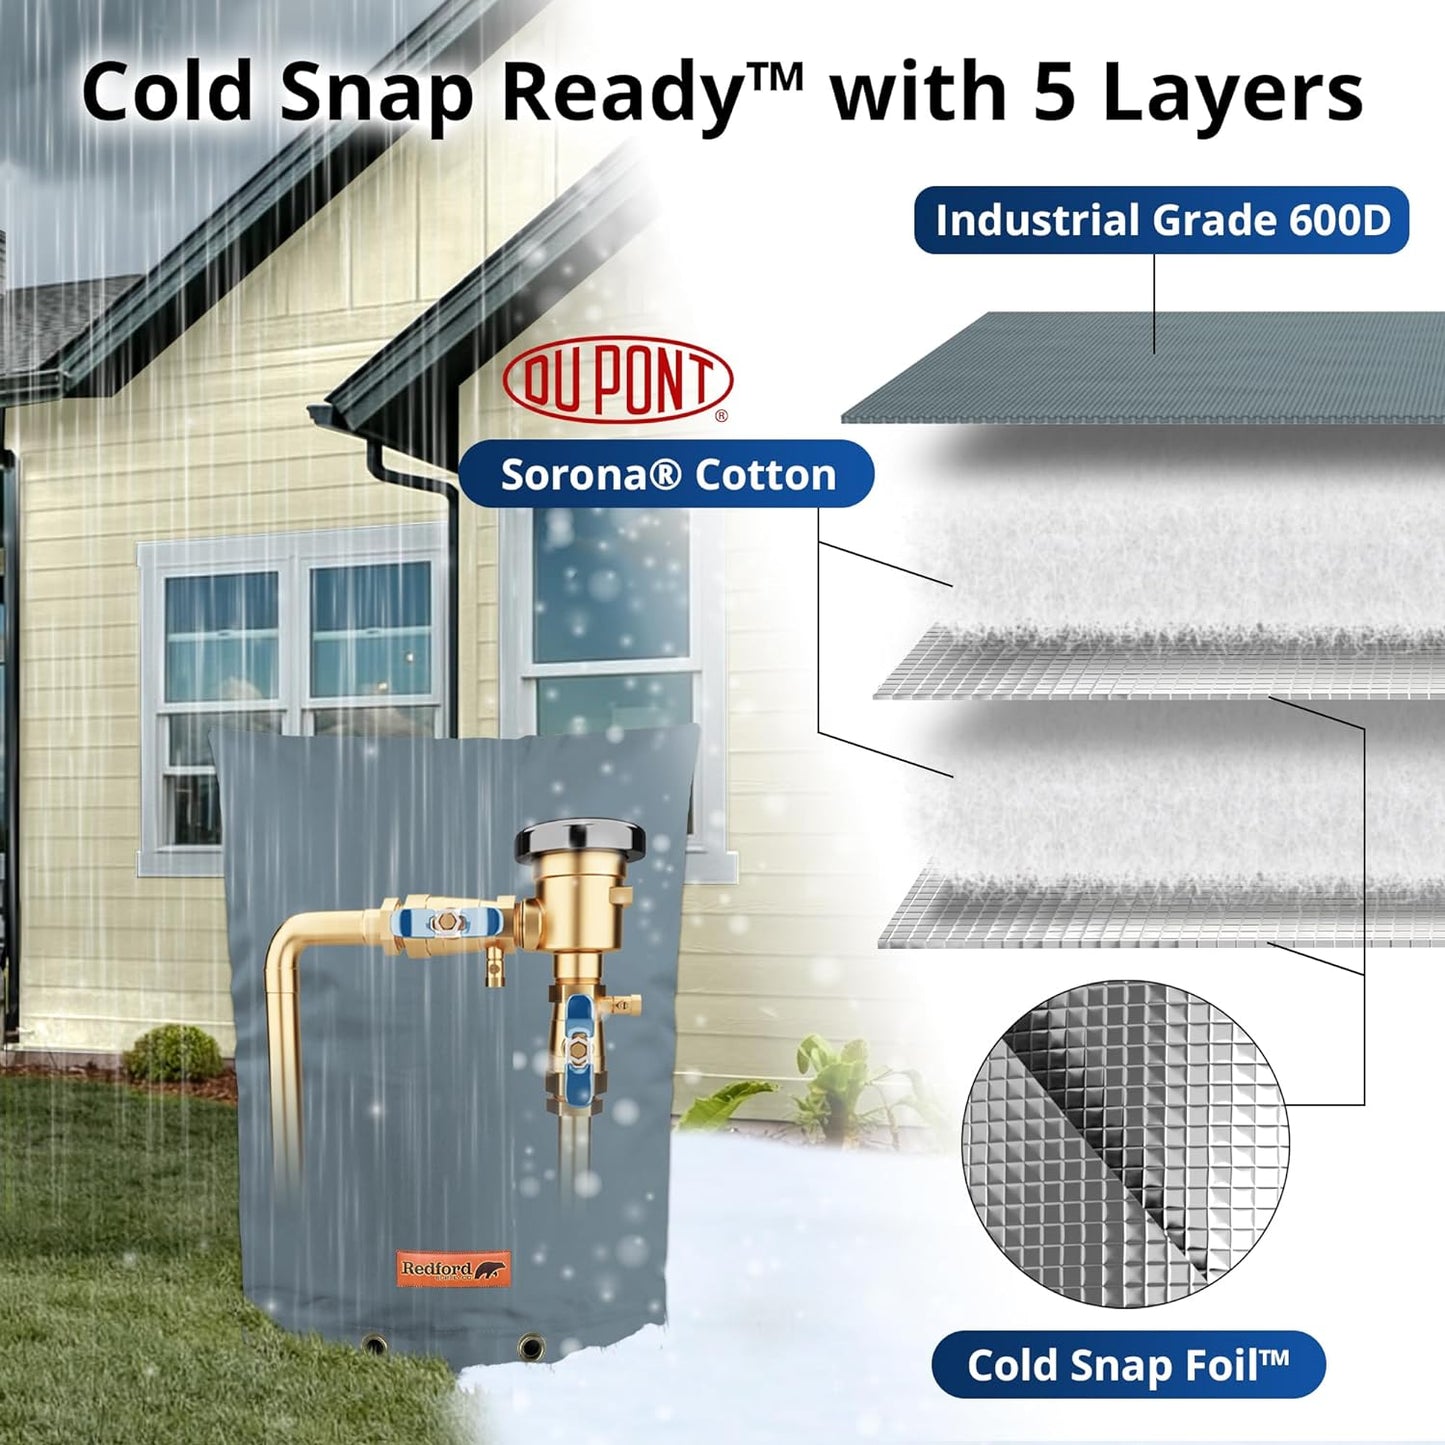 Cold Snap Double Wall™ Backflow Cover Prevents Costly Repairs Due to Freezing Weather - Easily Slips On and Off for Fast Concealment (Grey)